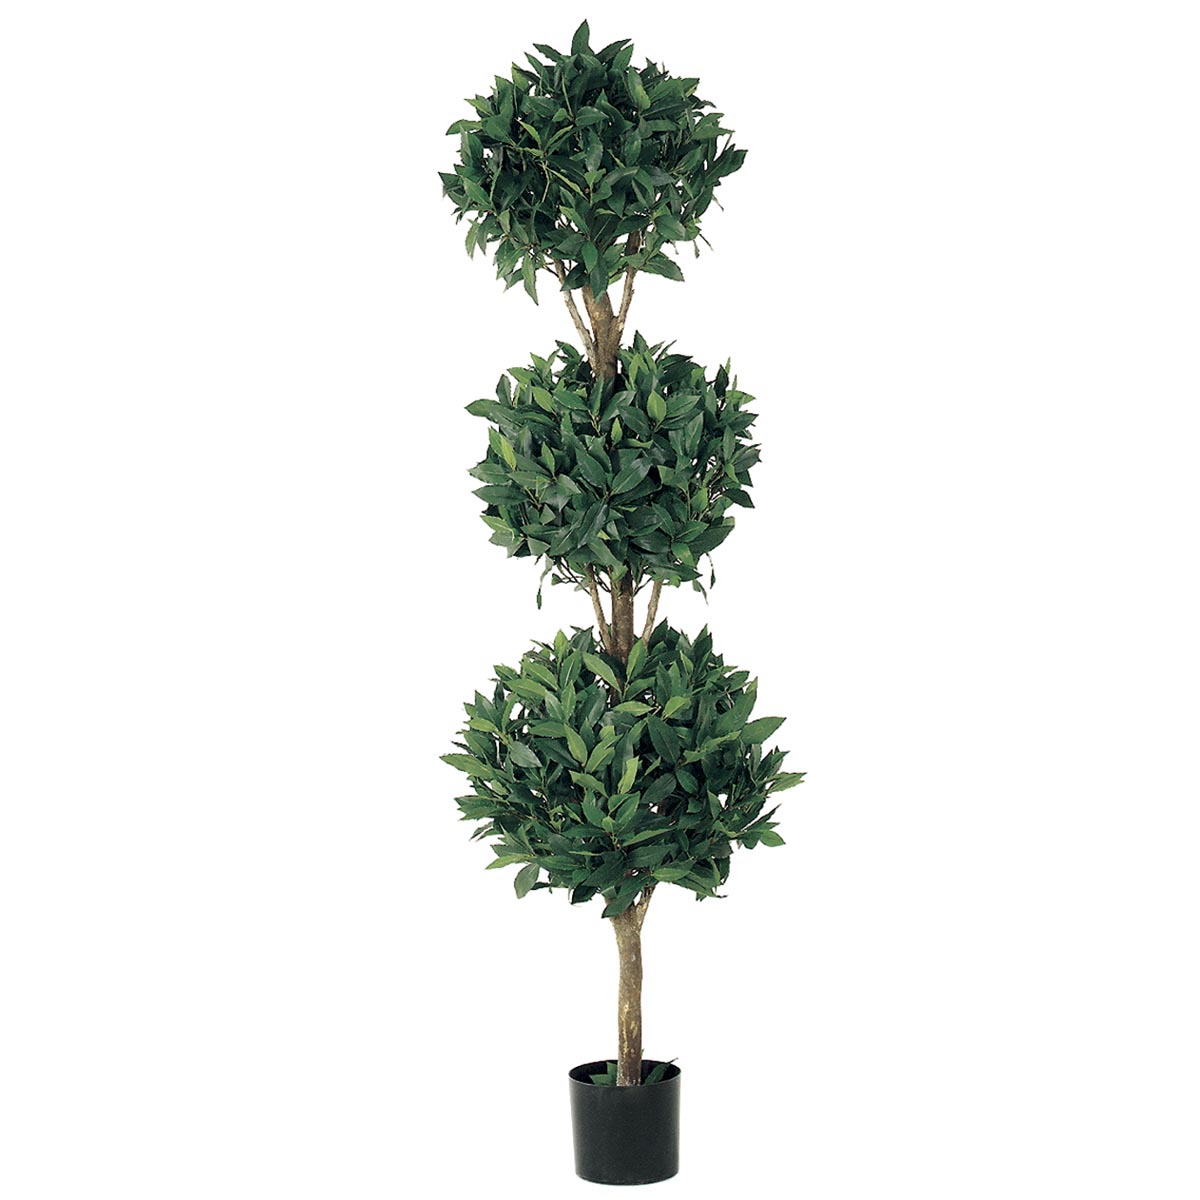 5 Foot Triple Ball Sweet Bay Topiary: Limited Uv